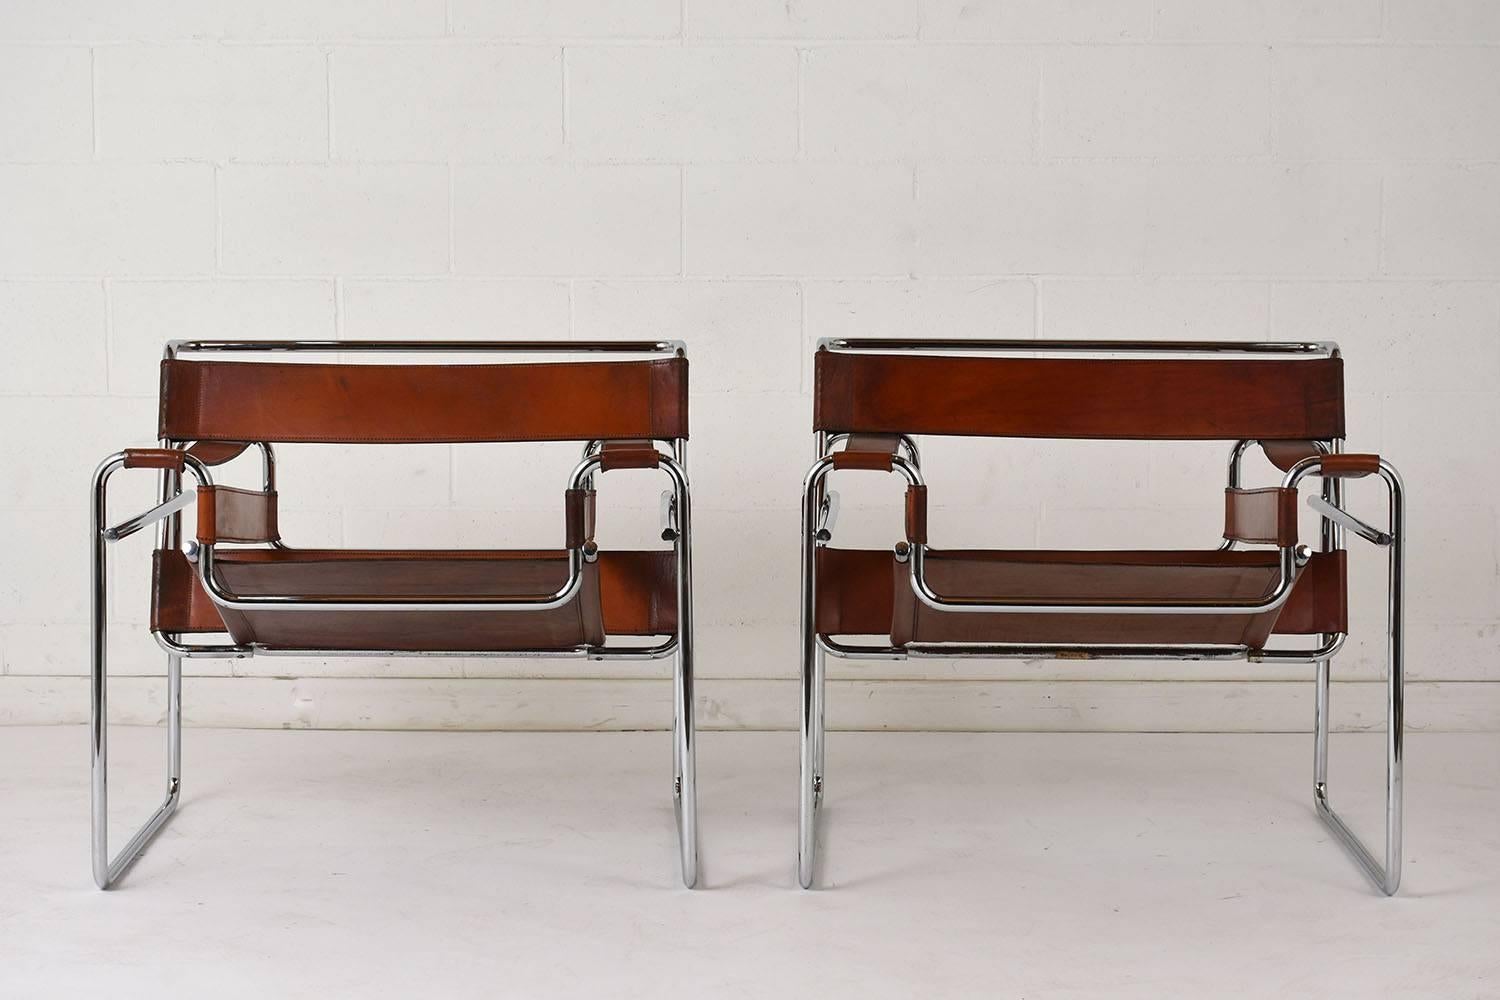 This pair of 1960s Mid-Century Modern Wassily chairs are designed by Marcel Breuer. The chairs feature the iconic frame shape made of steel with a chrome finish. The seats have the original leather straps and seat finished in a rich brown color with